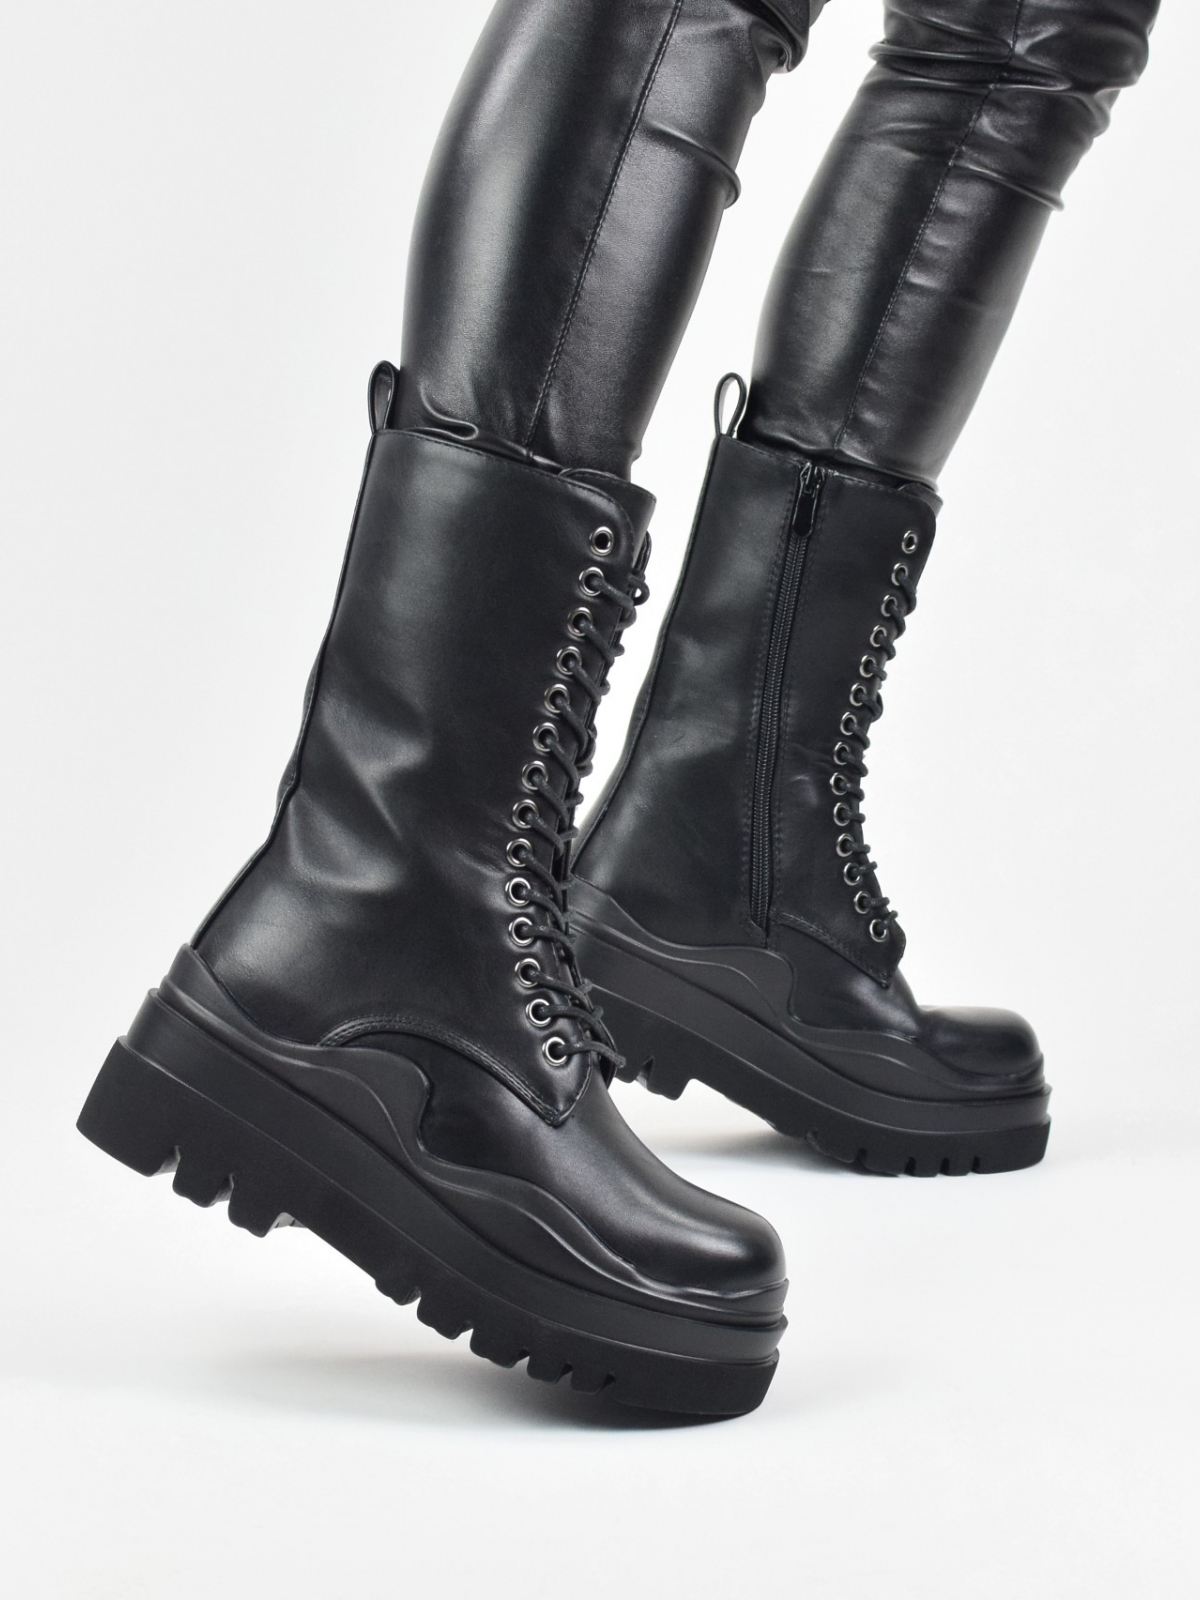 Exclusive design ankle boots with lace up & zipper inside in black